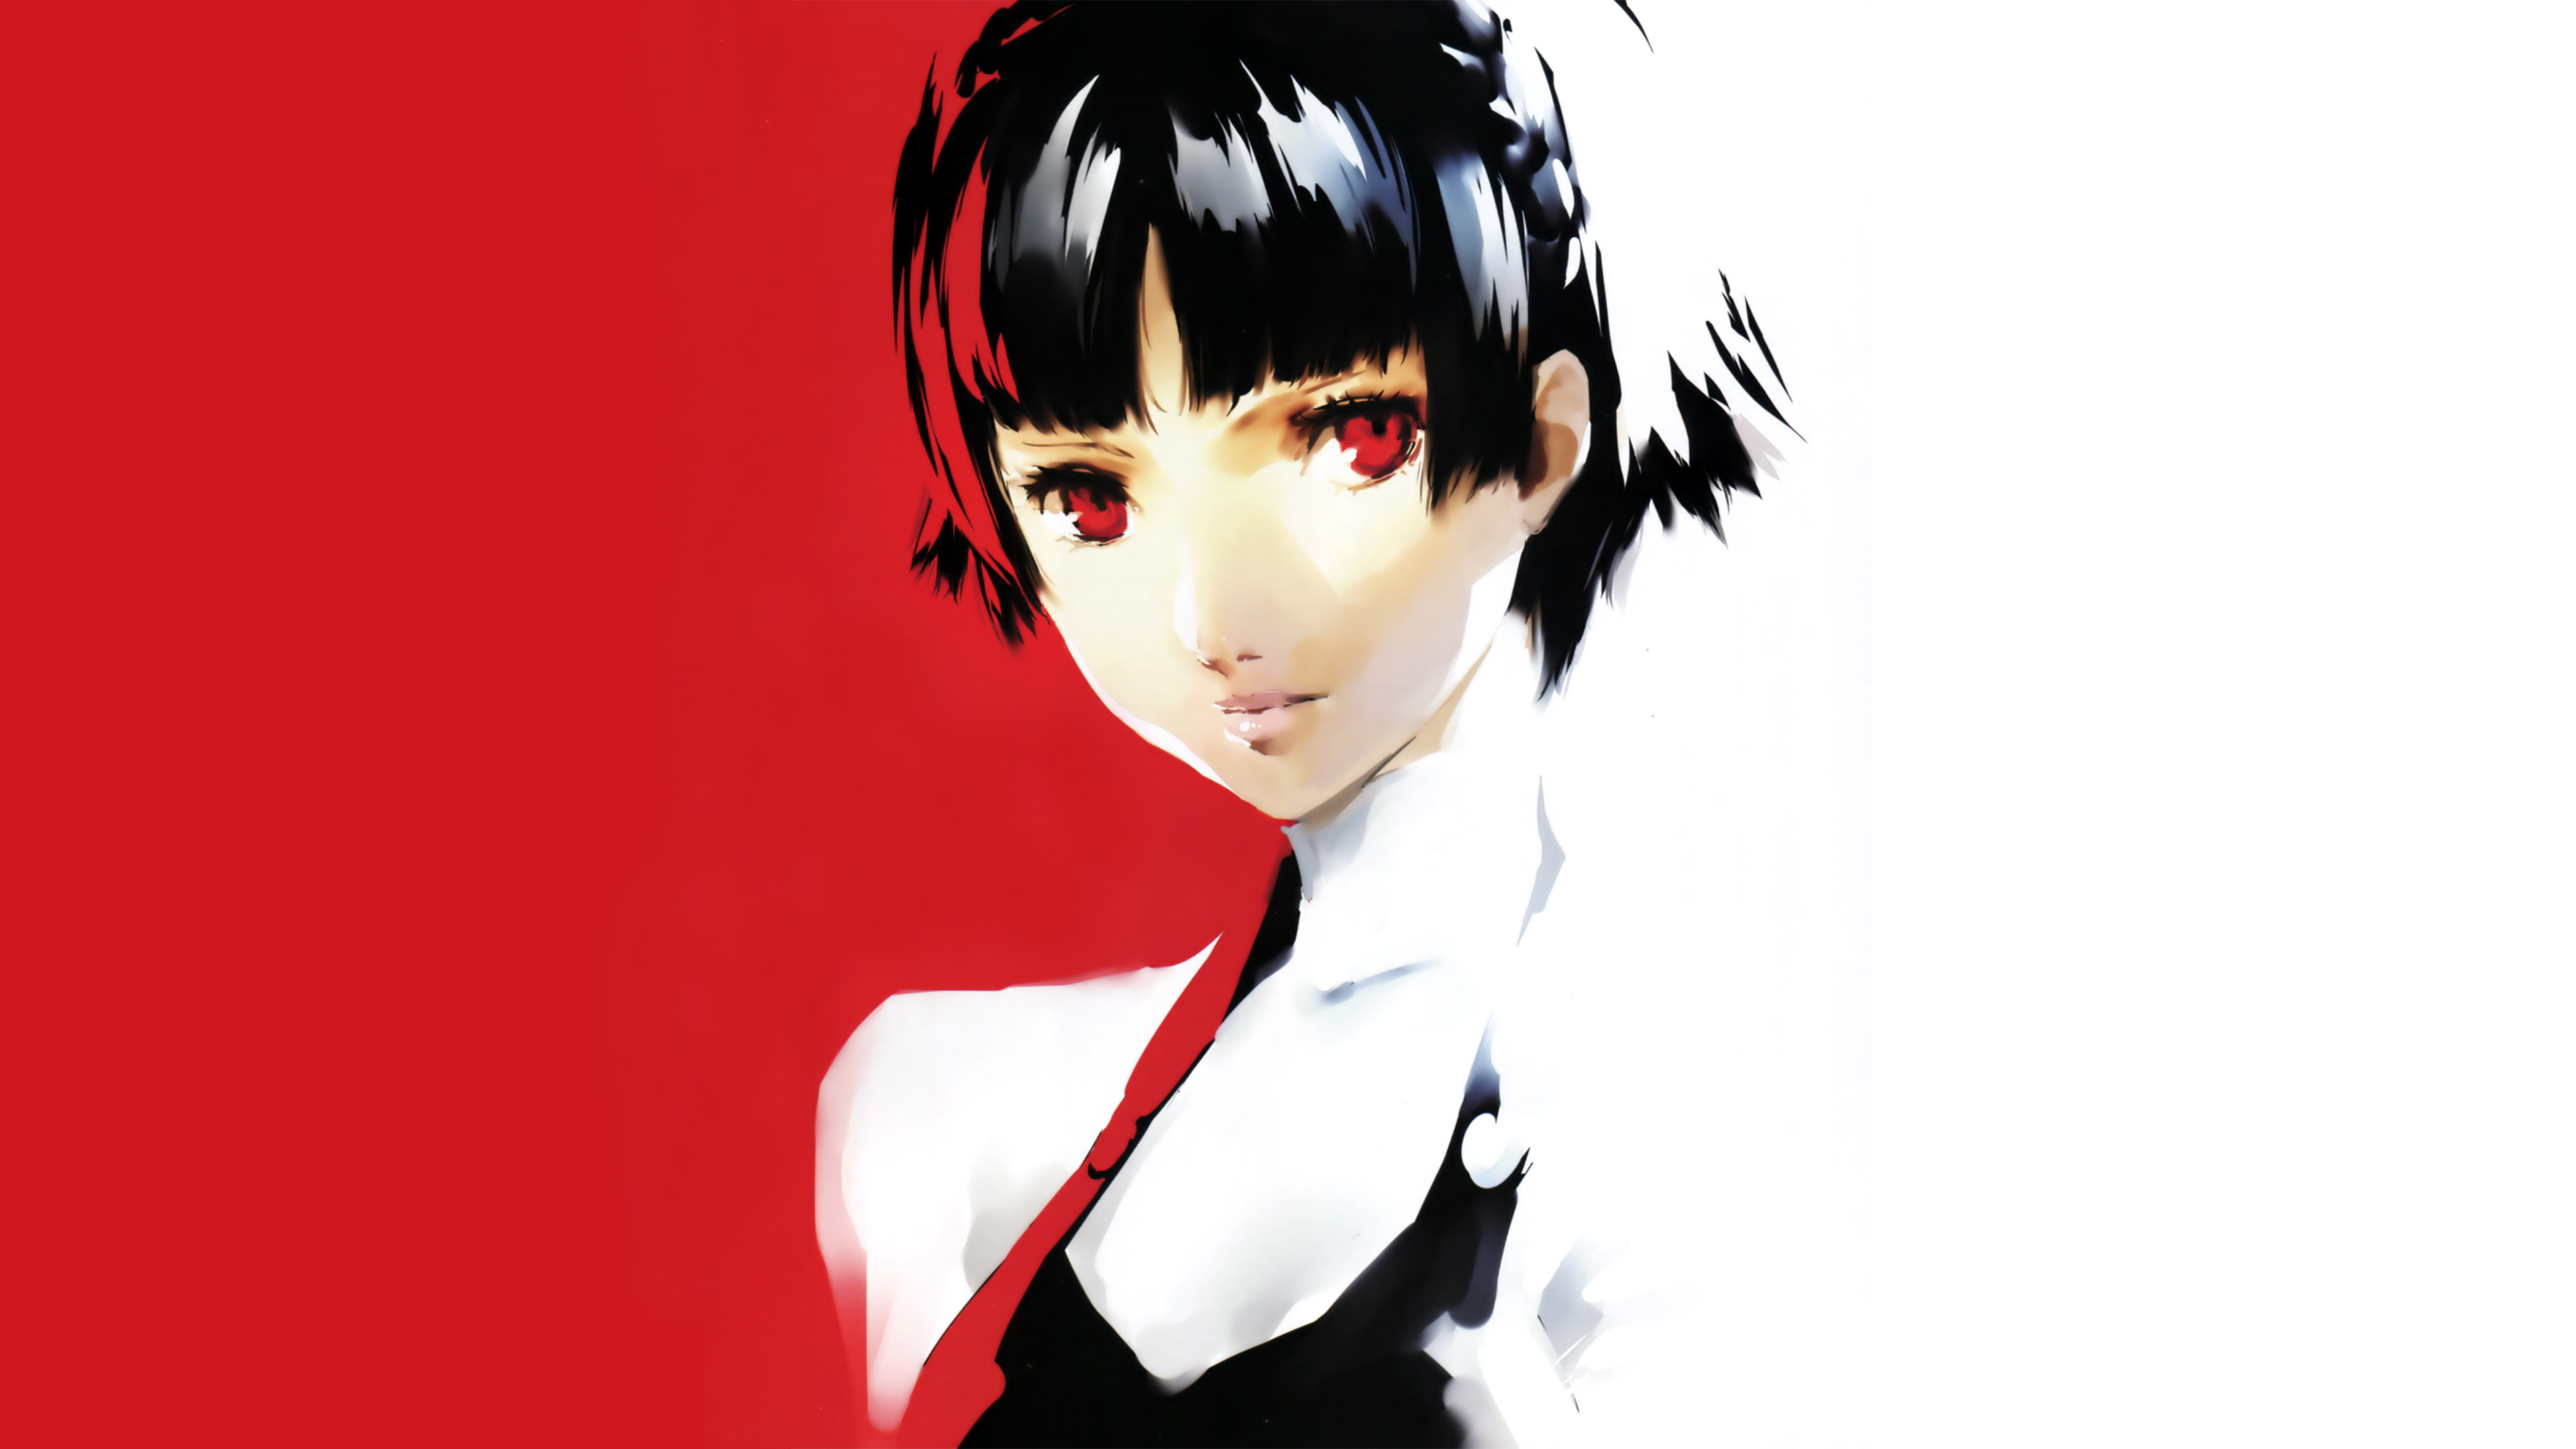 Video Game Persona 5 HD Wallpaper Background Image. 